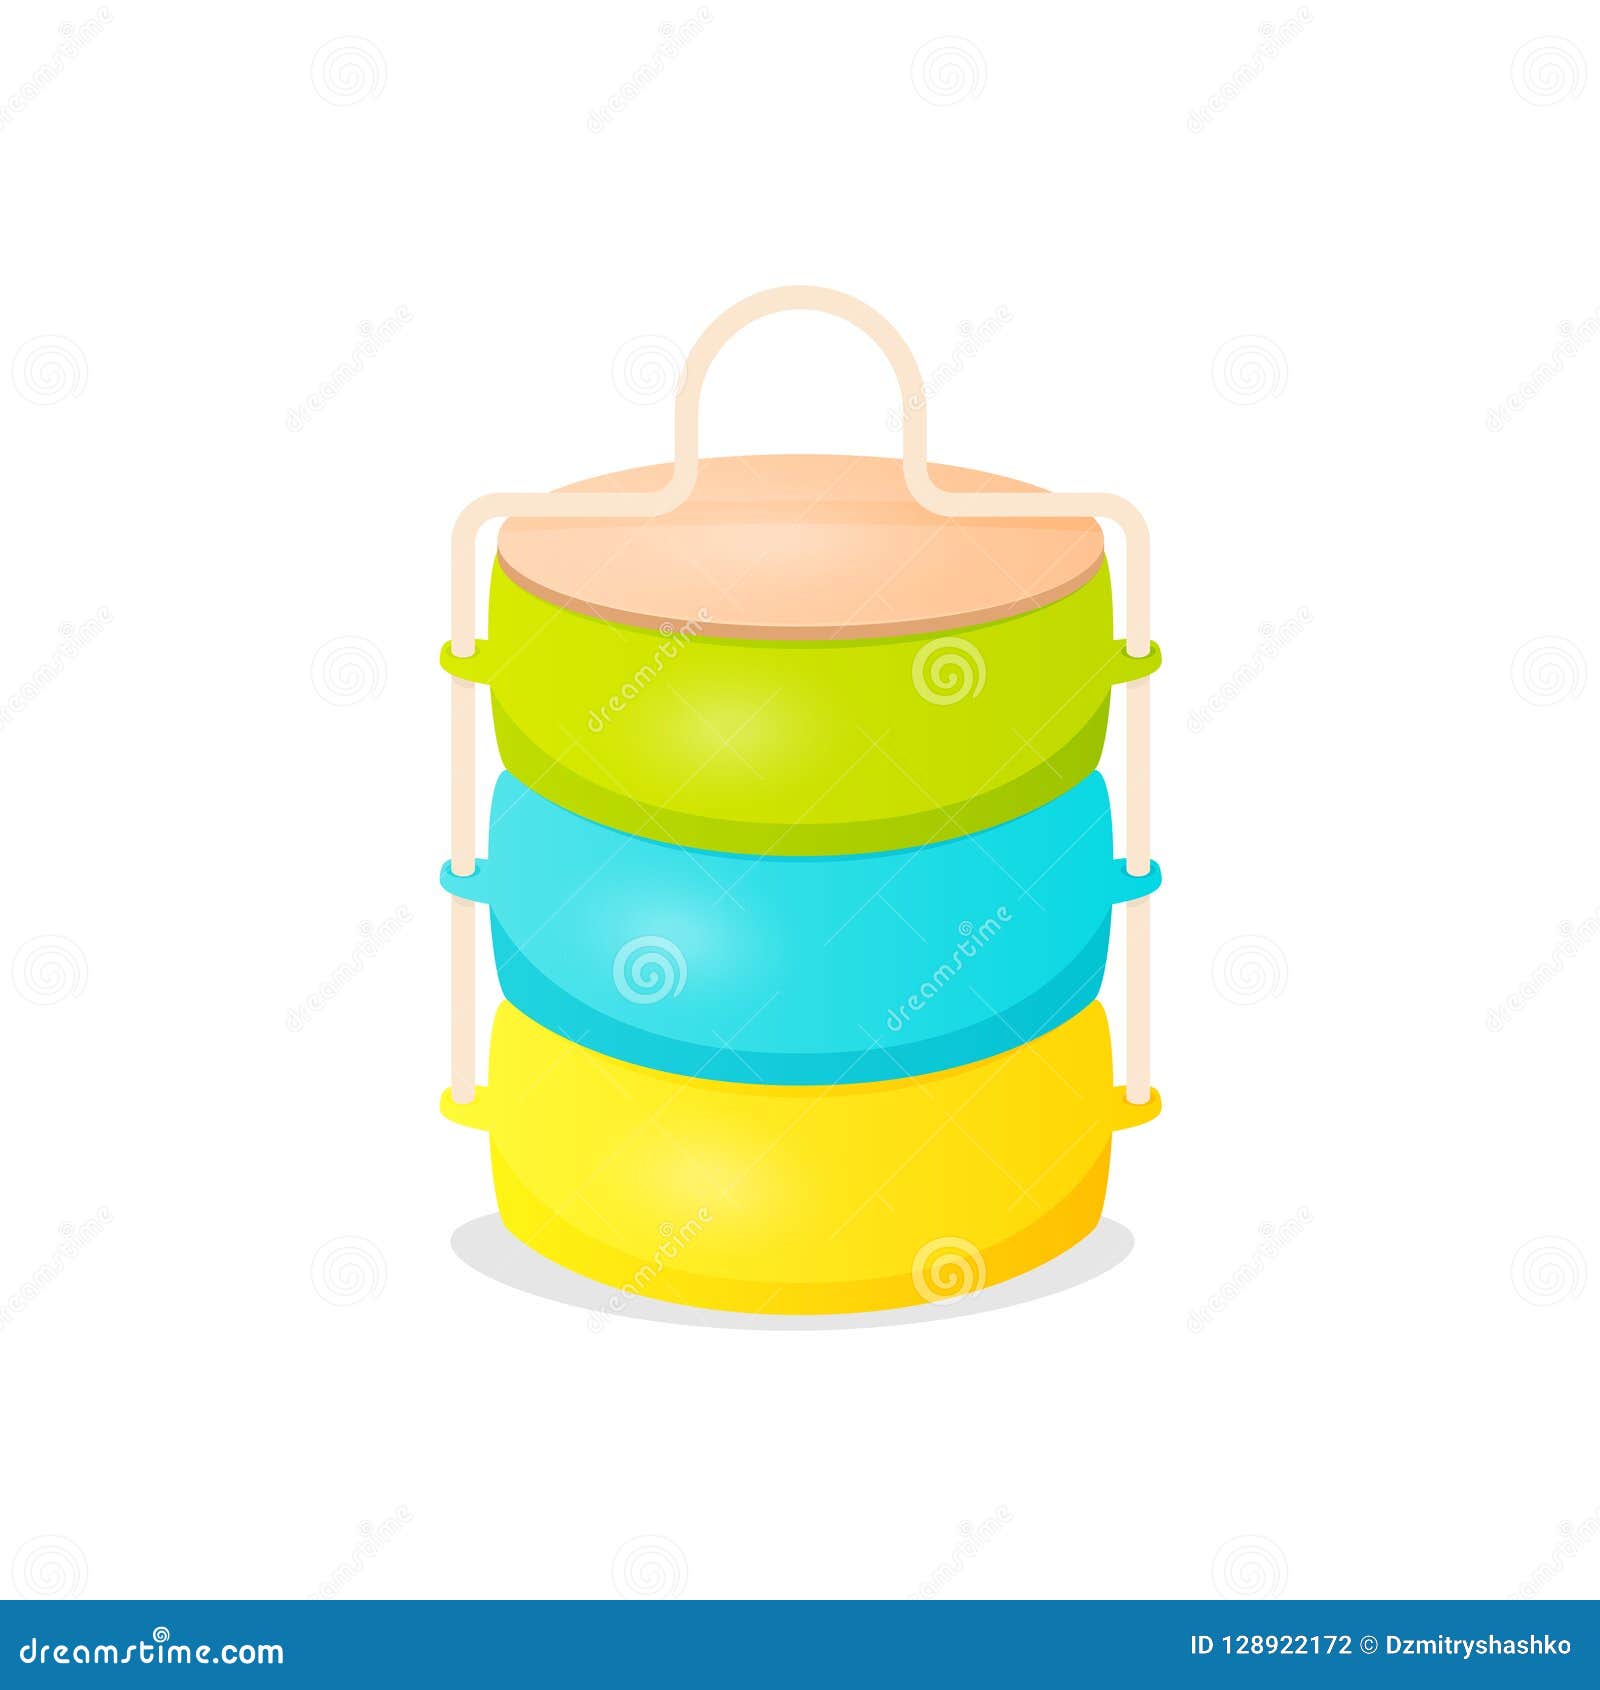 Colorfull Cartoon Indian Tiffin Box Icon Stock Vector - Illustration of  layer, handle: 128922172